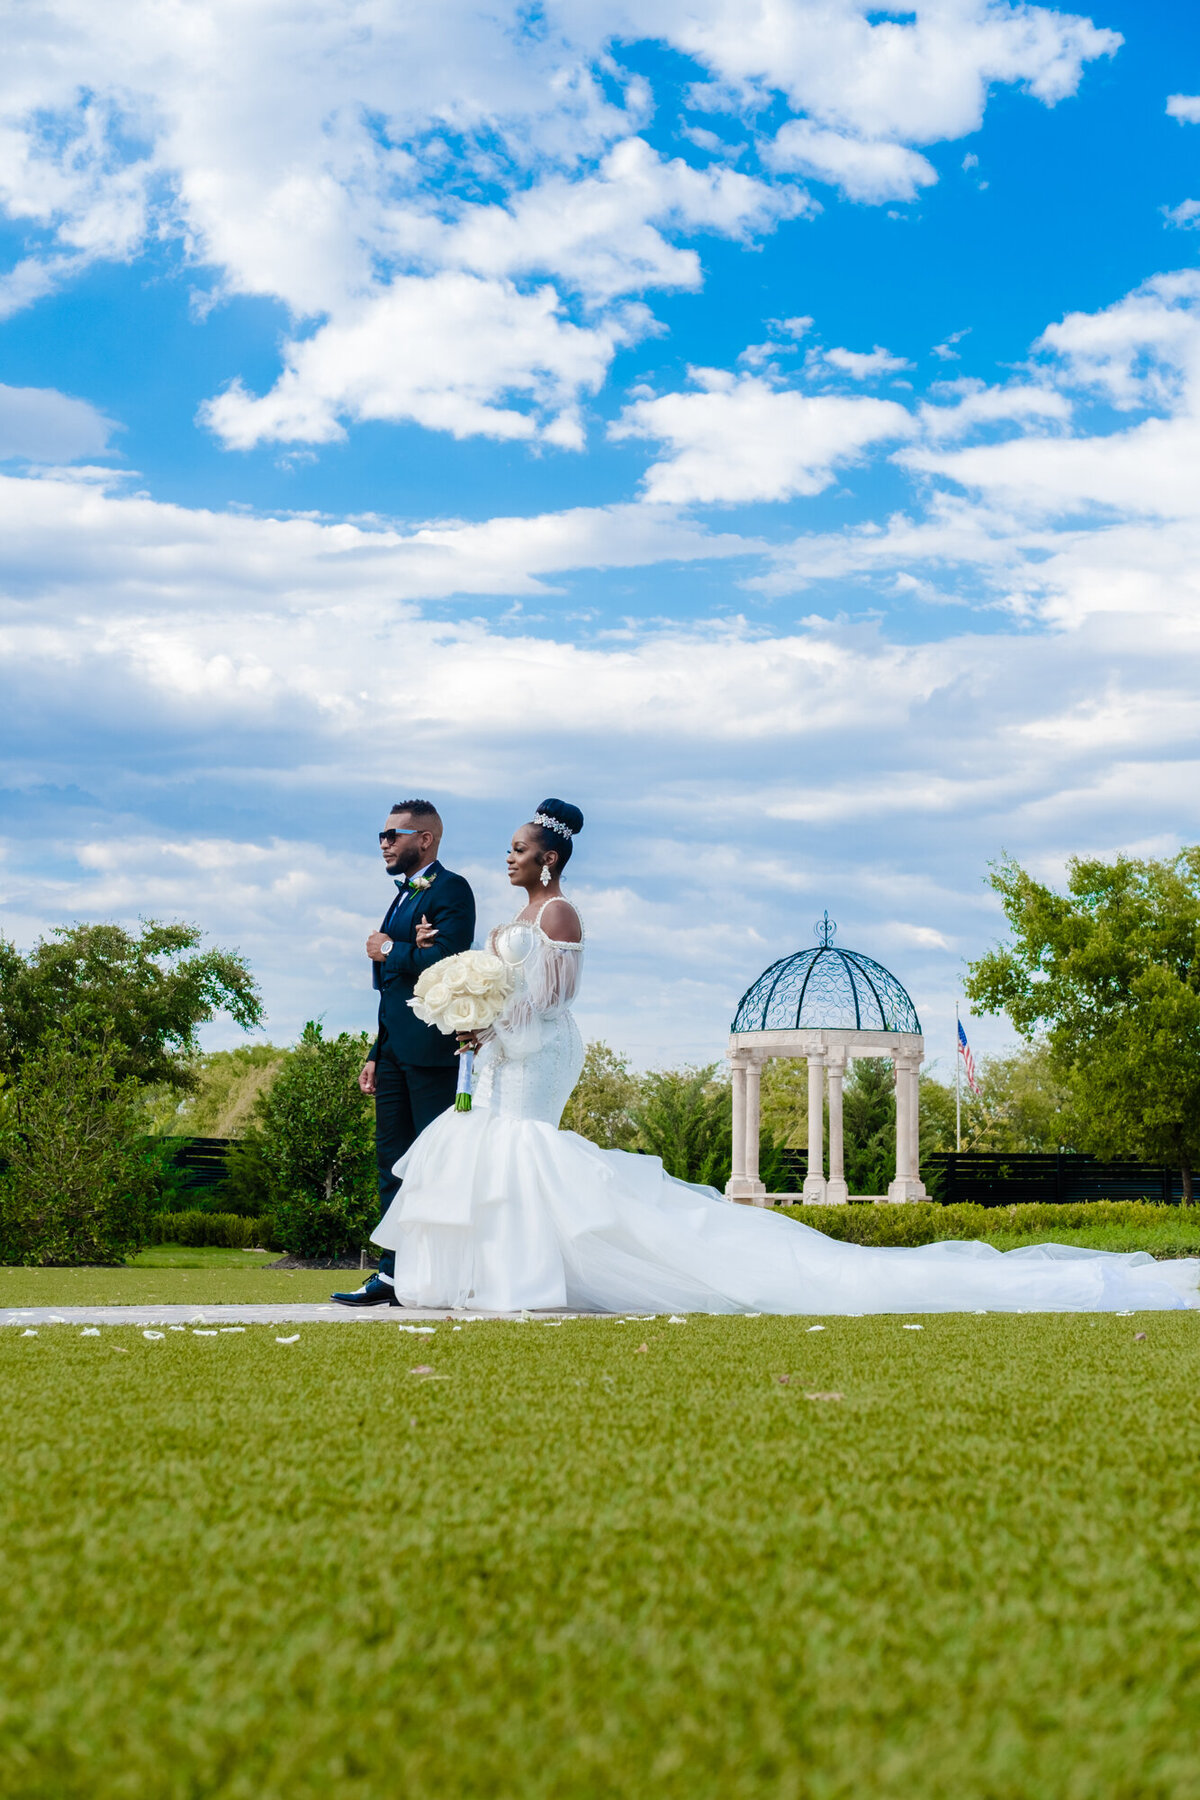 Weddings at Knotting Hill Place